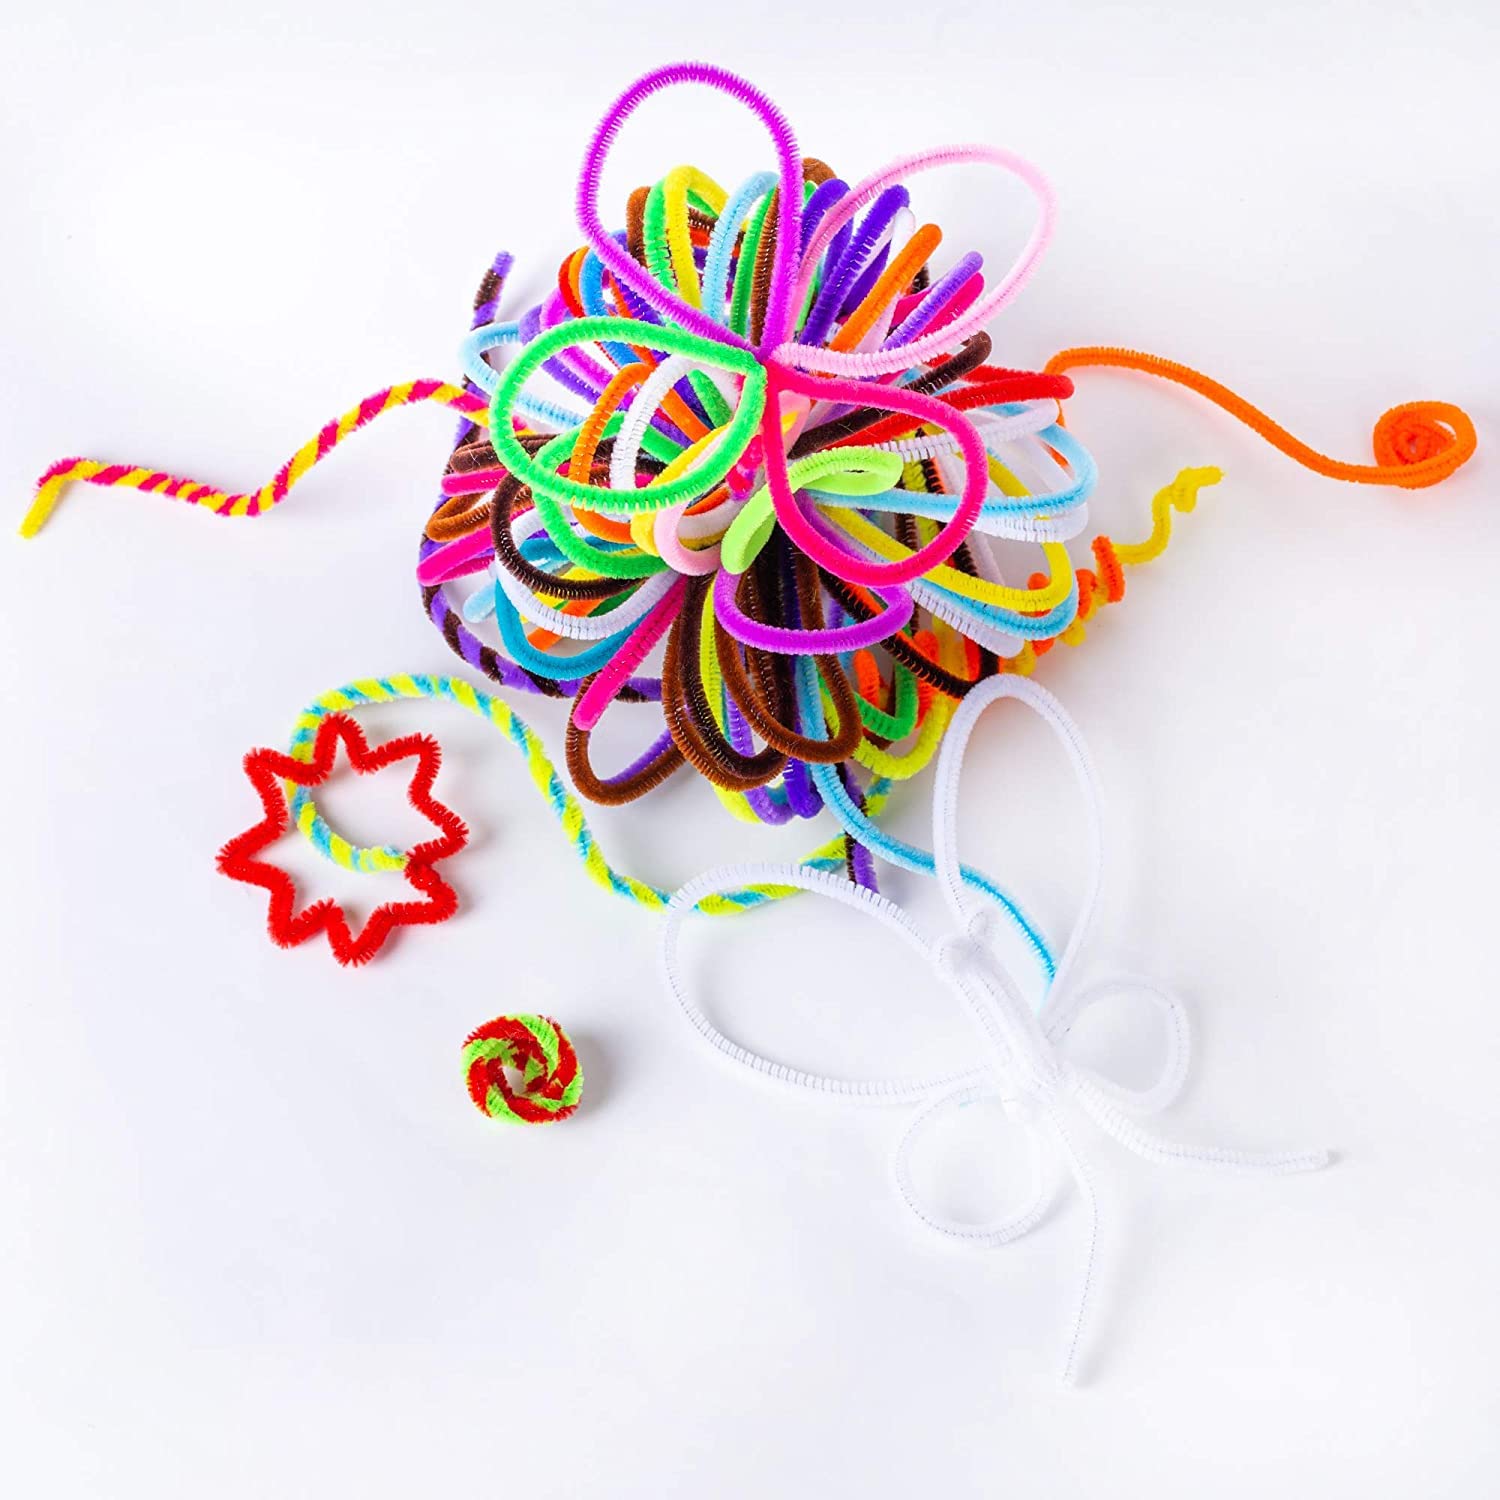 Craft Pipe Cleaners for Kids – 300 Chenille Stems in 20 Vibrant Colors Measure 6mm x 12 Inches Each – Bend, Twist and Connect to Create Fun, Fuzzy Ornaments, Decorations, Animals and Flowers